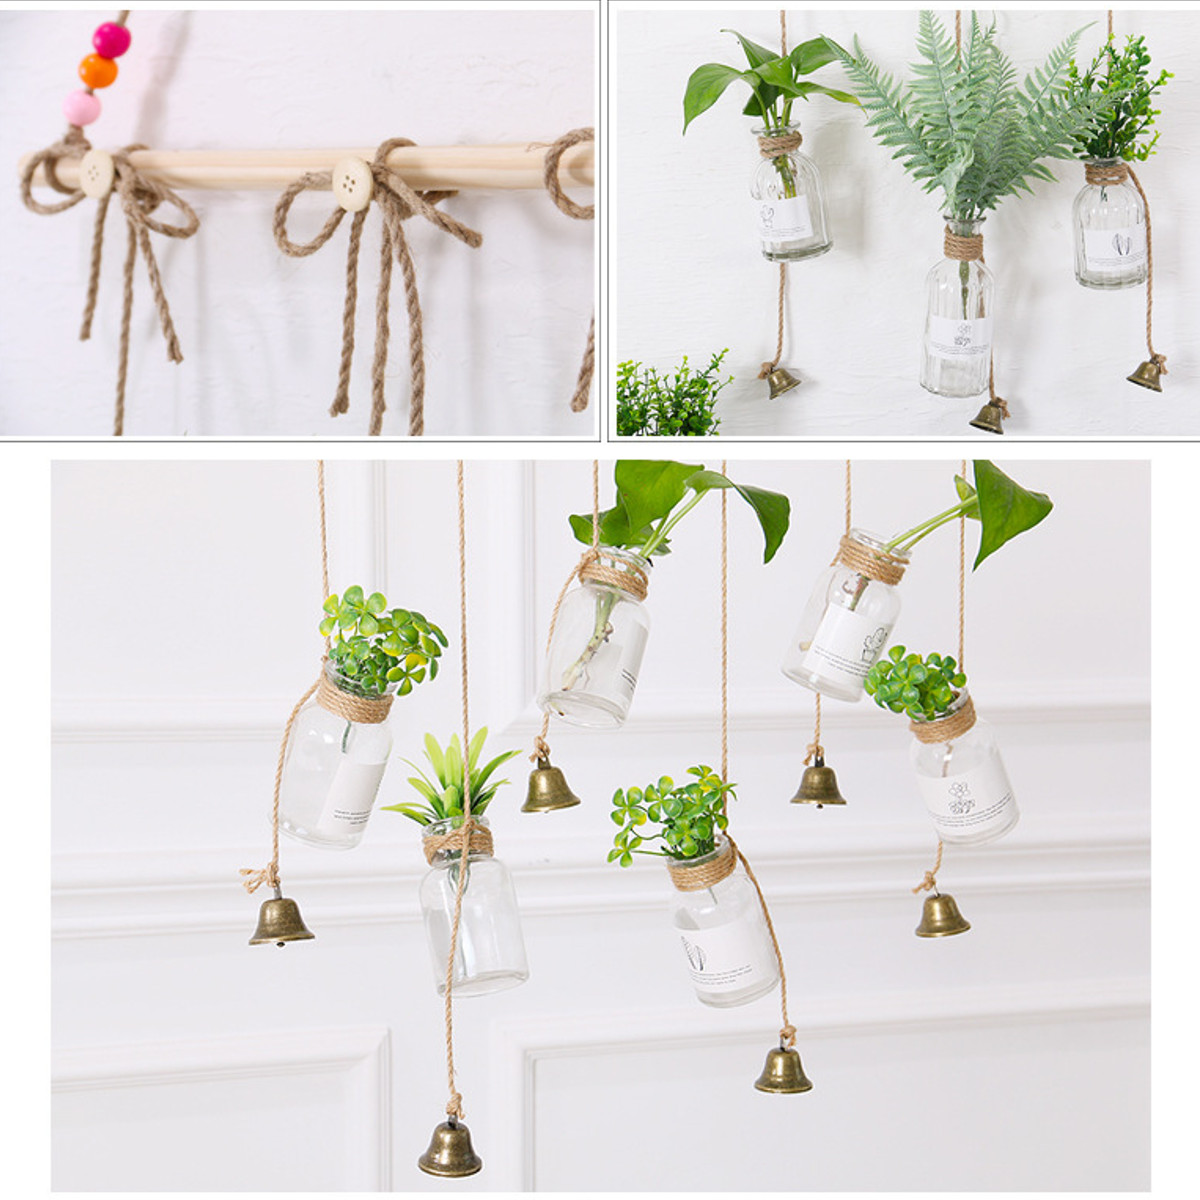 Hanging-Clear-Glass-Flower-Plant-Hydroponic-System-Vase-Terrarium-Container-Home-Garden-1438290-4